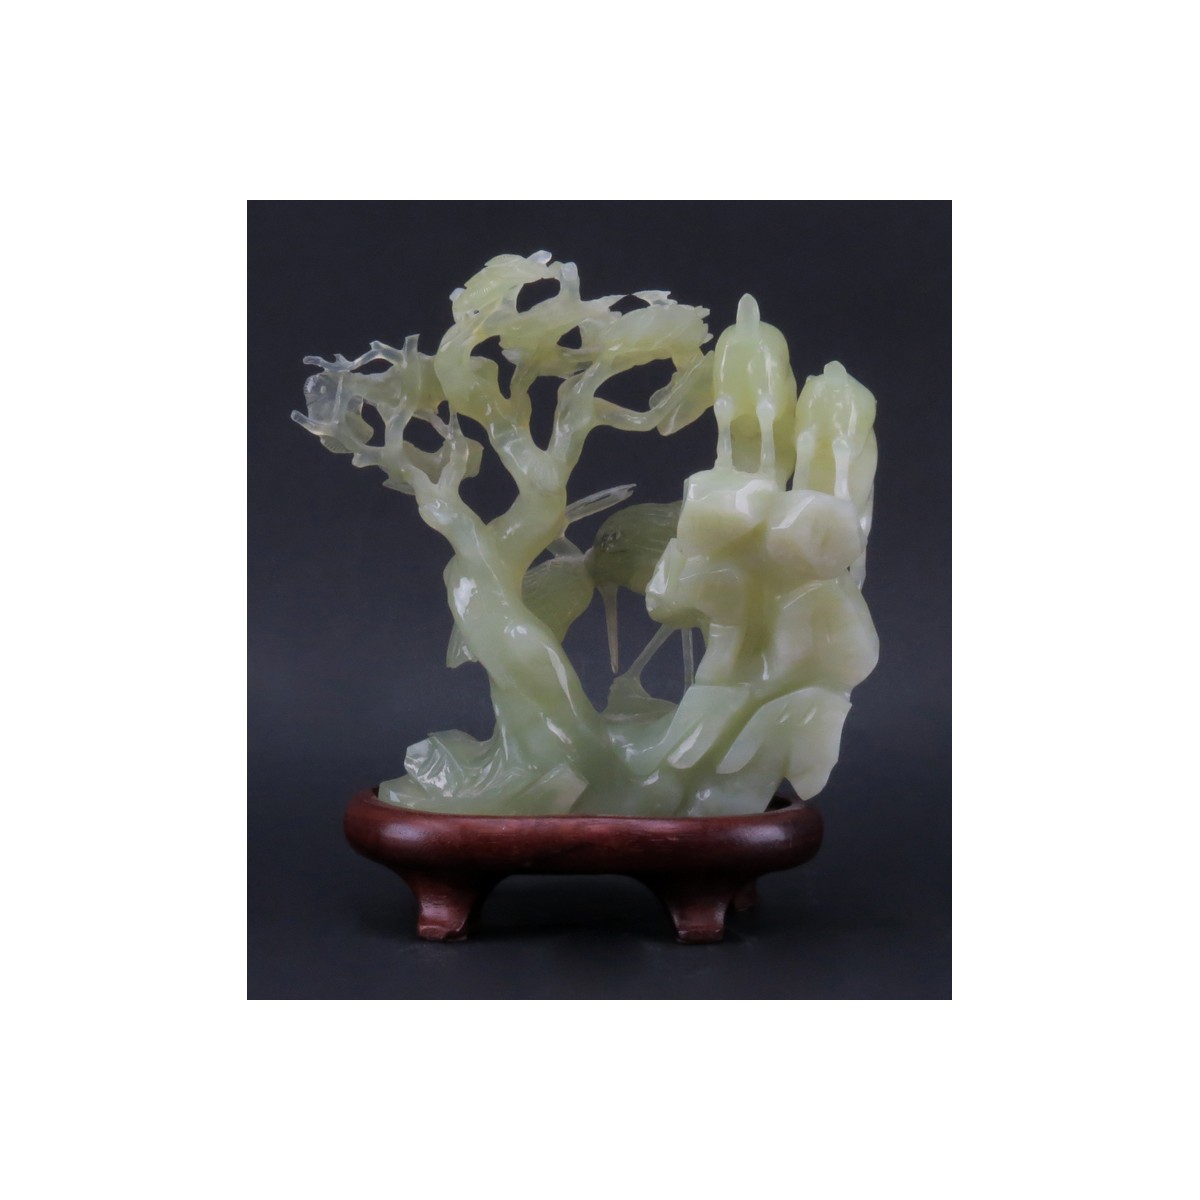 20th Century Chinese Carved Serpentine Bird Group on Wood Stand. Unsigned. Losses. Please examine c